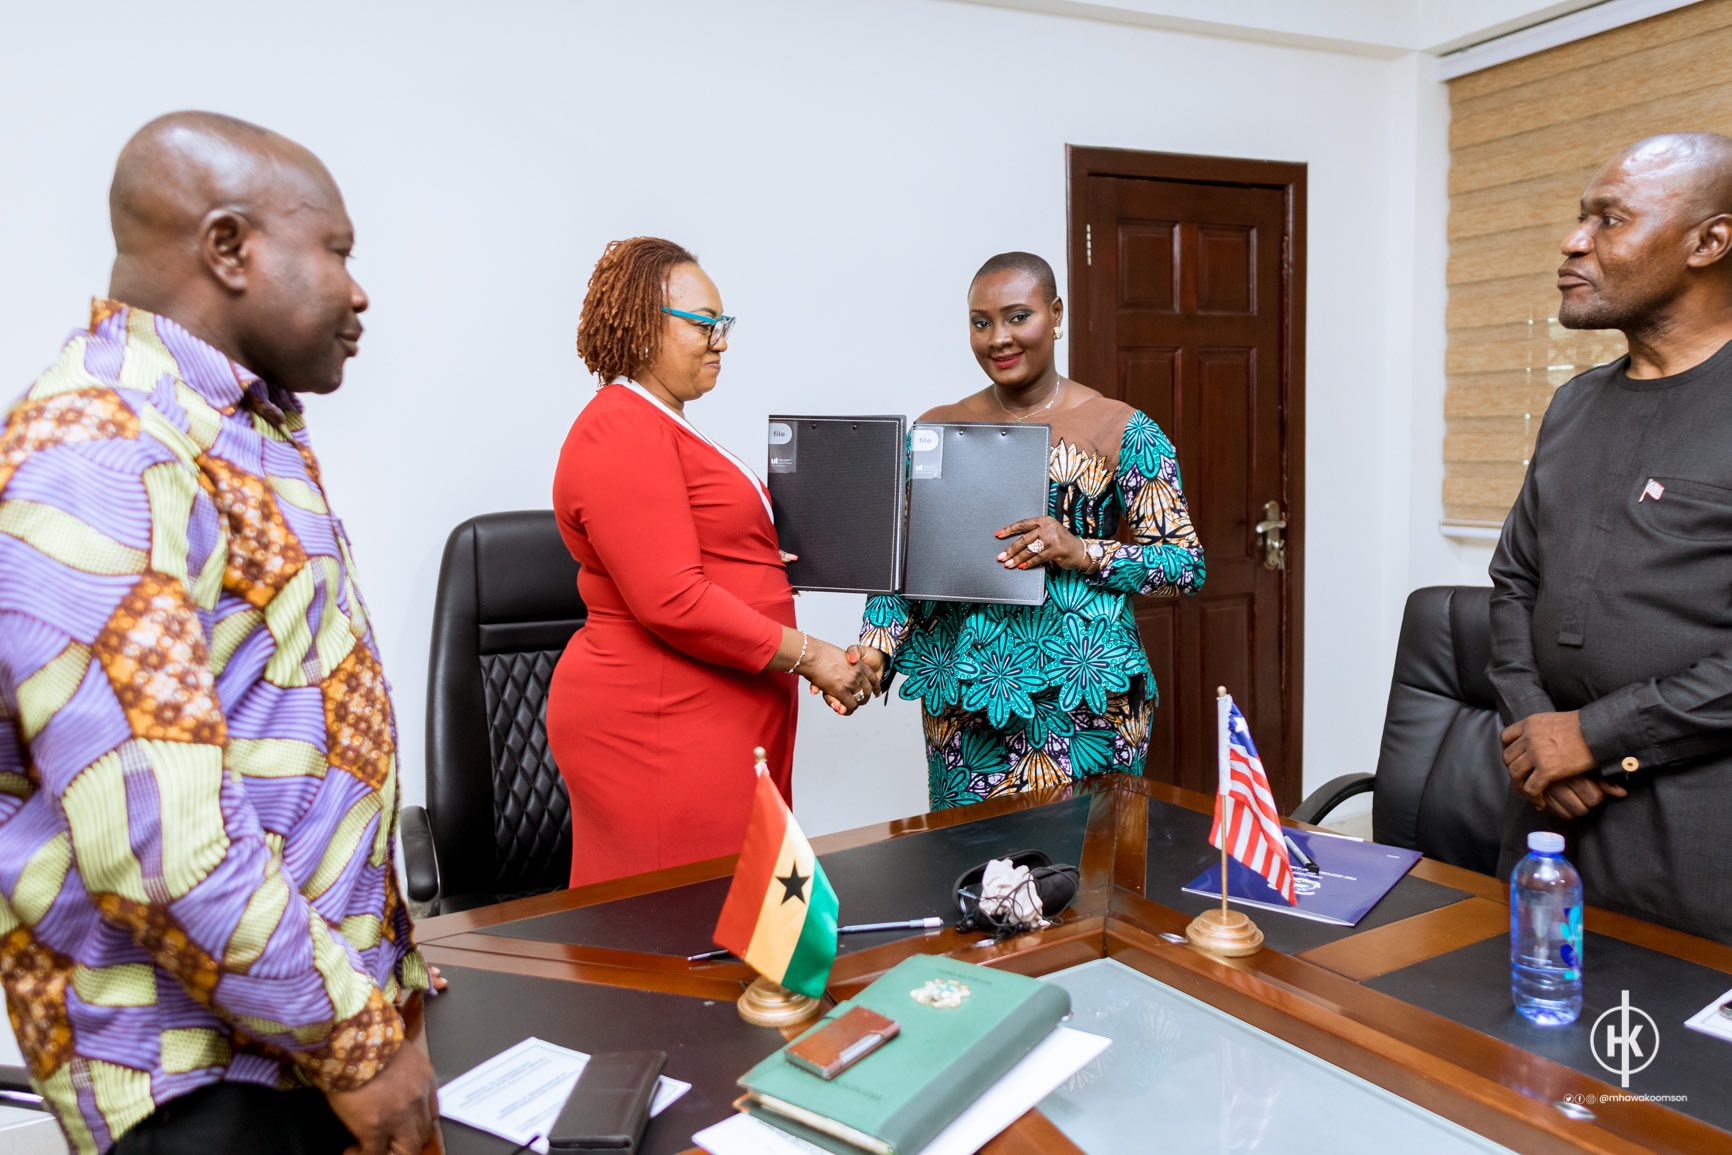 Ghana and Liberia sign a Memorandum of Understanding (MOU) for cooperation in the fight against illegal, unreported and unregulated (IUU) fishing activities